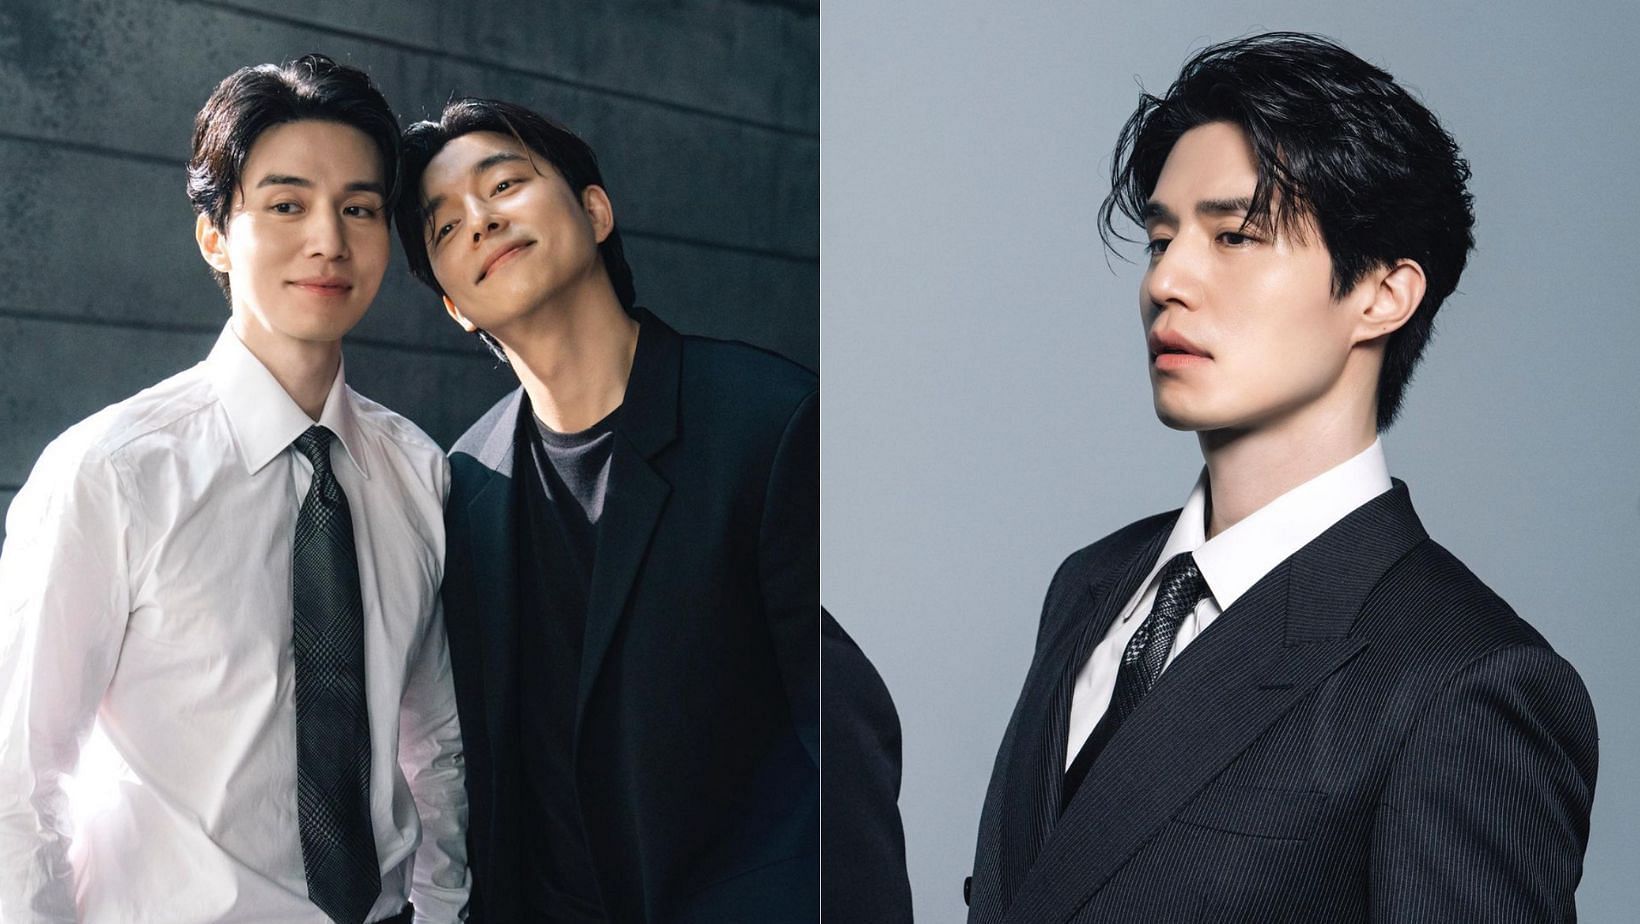 Lee Dong-wook shares how Gong Yoo helped him overcome one of the hardest periods of his life. (Images via Instagram/@leedongwook_official)